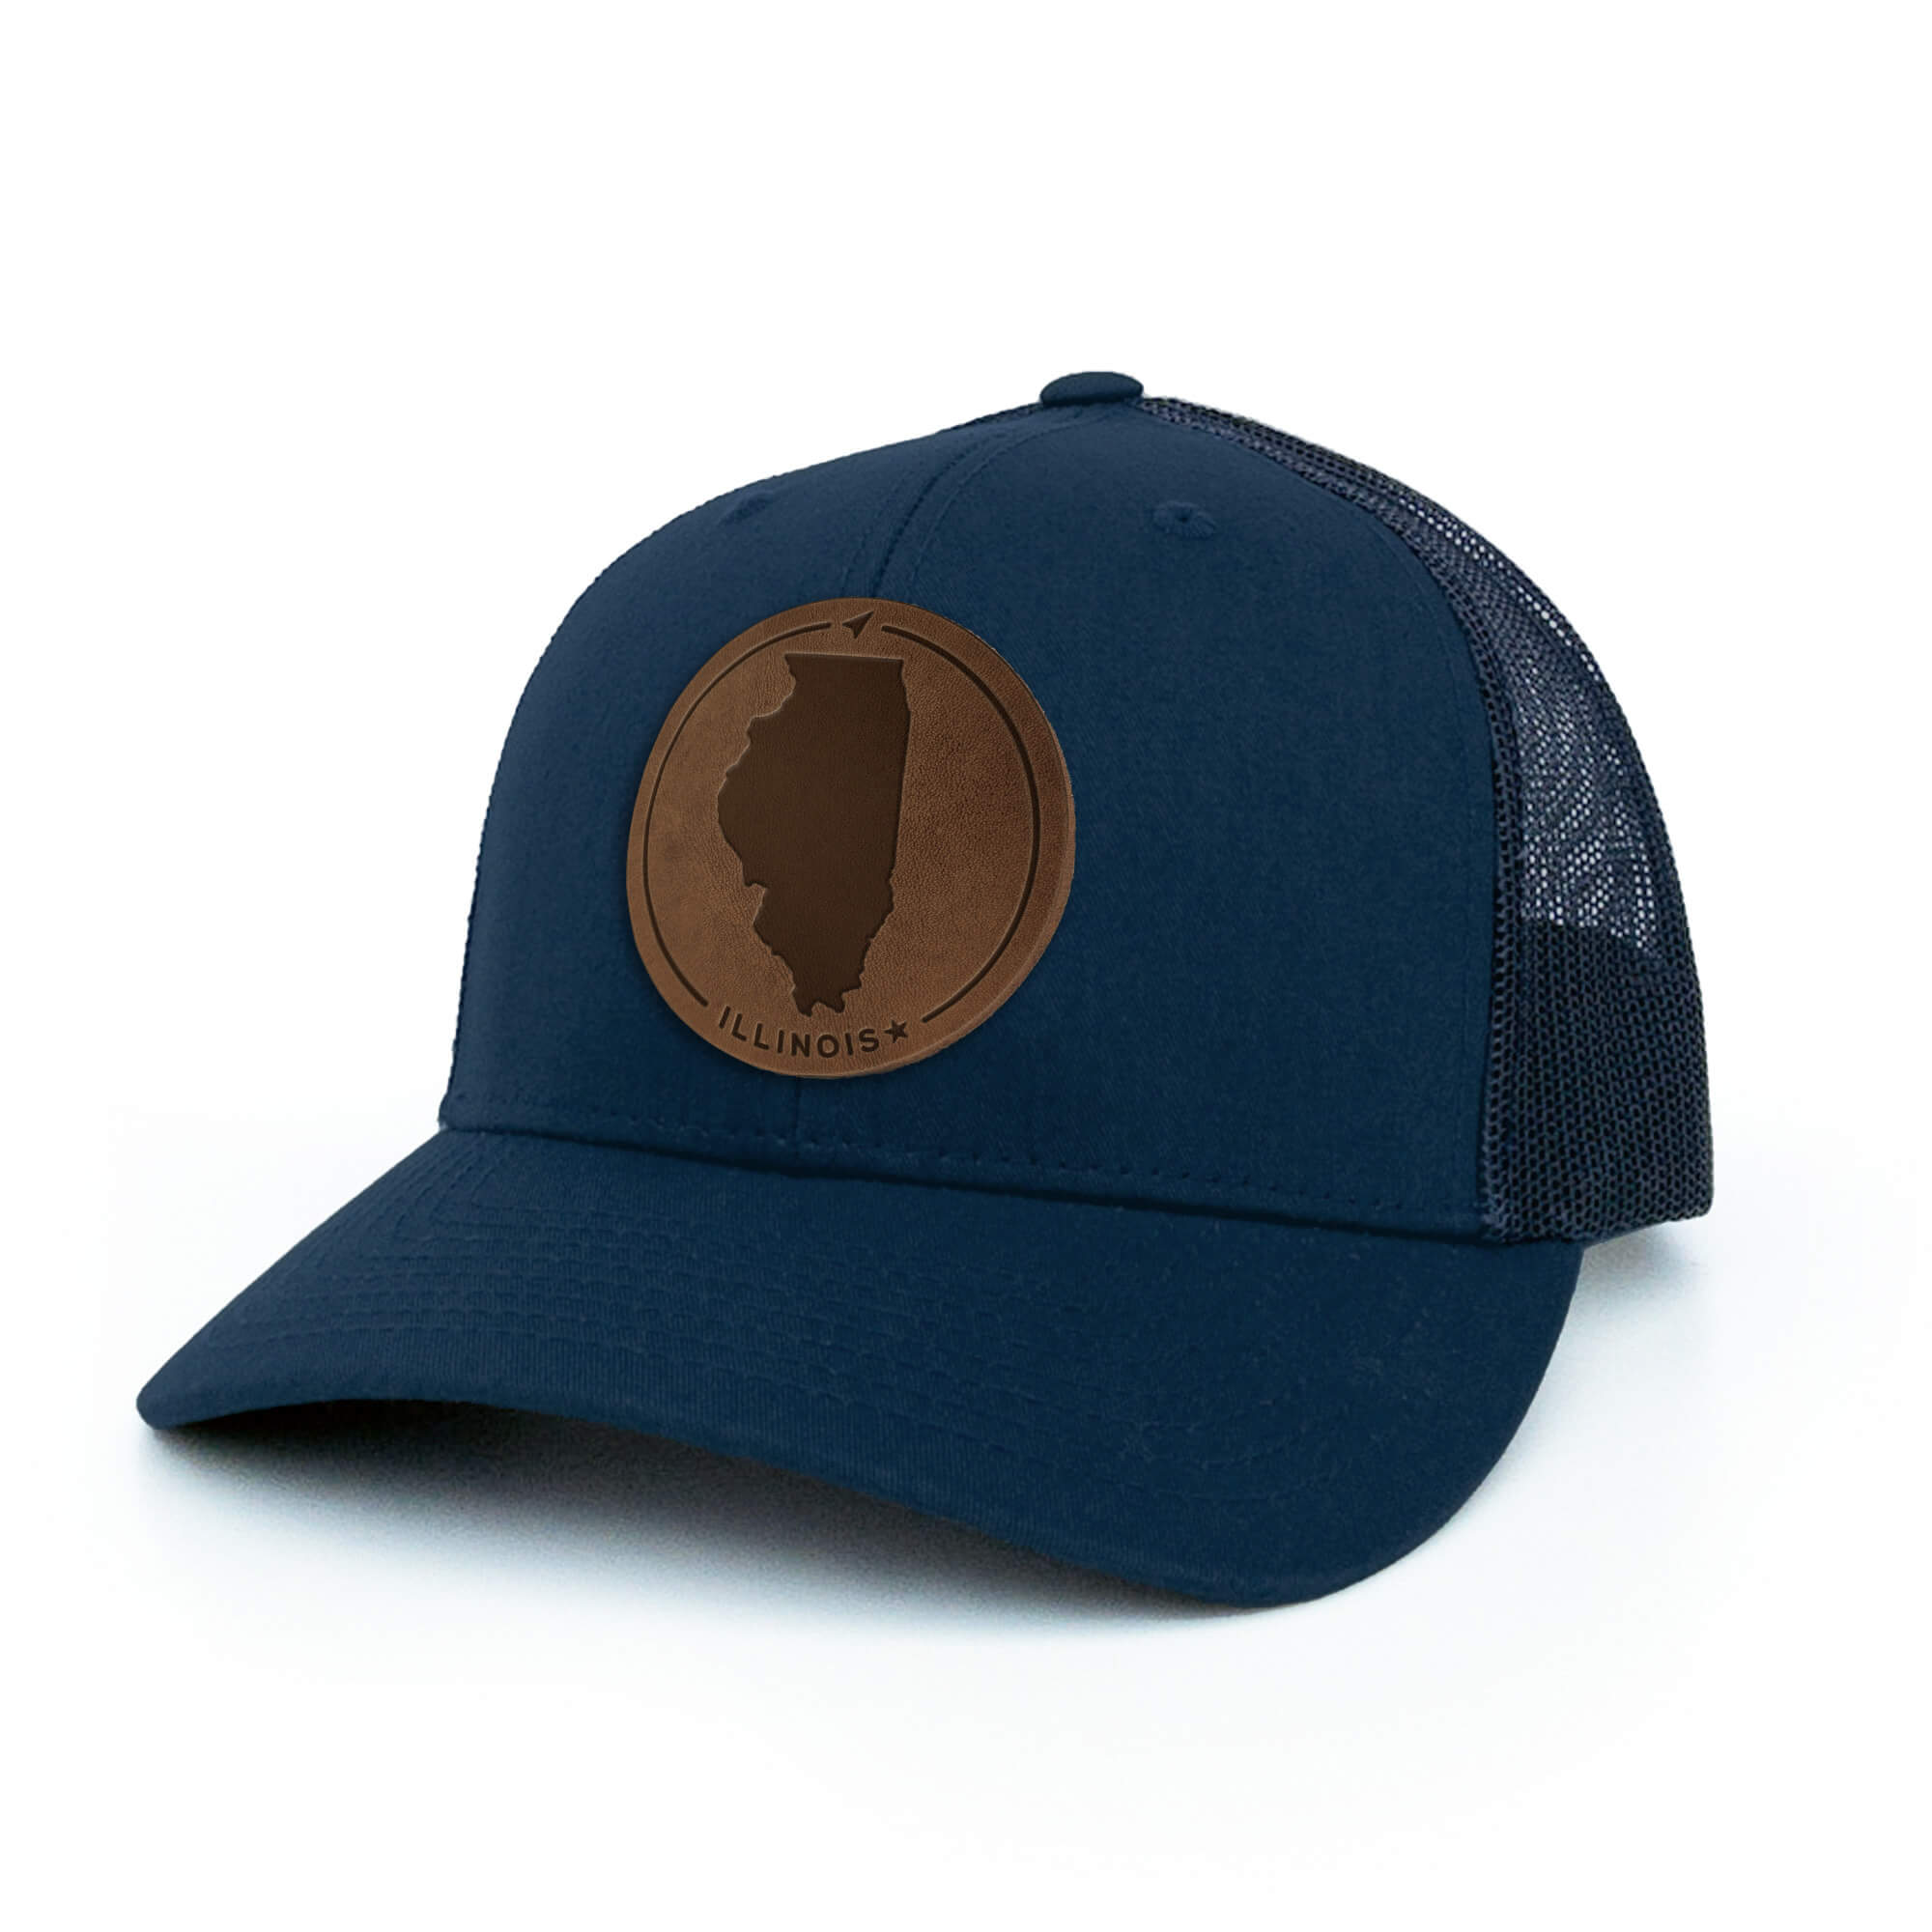 Navy trucker hat with full-grain leather patch of Illinois | BLACK-003-008, CHARC-003-008, NAVY-003-008, HGREY-003-008, MOSS-003-008, BROWN-003-008